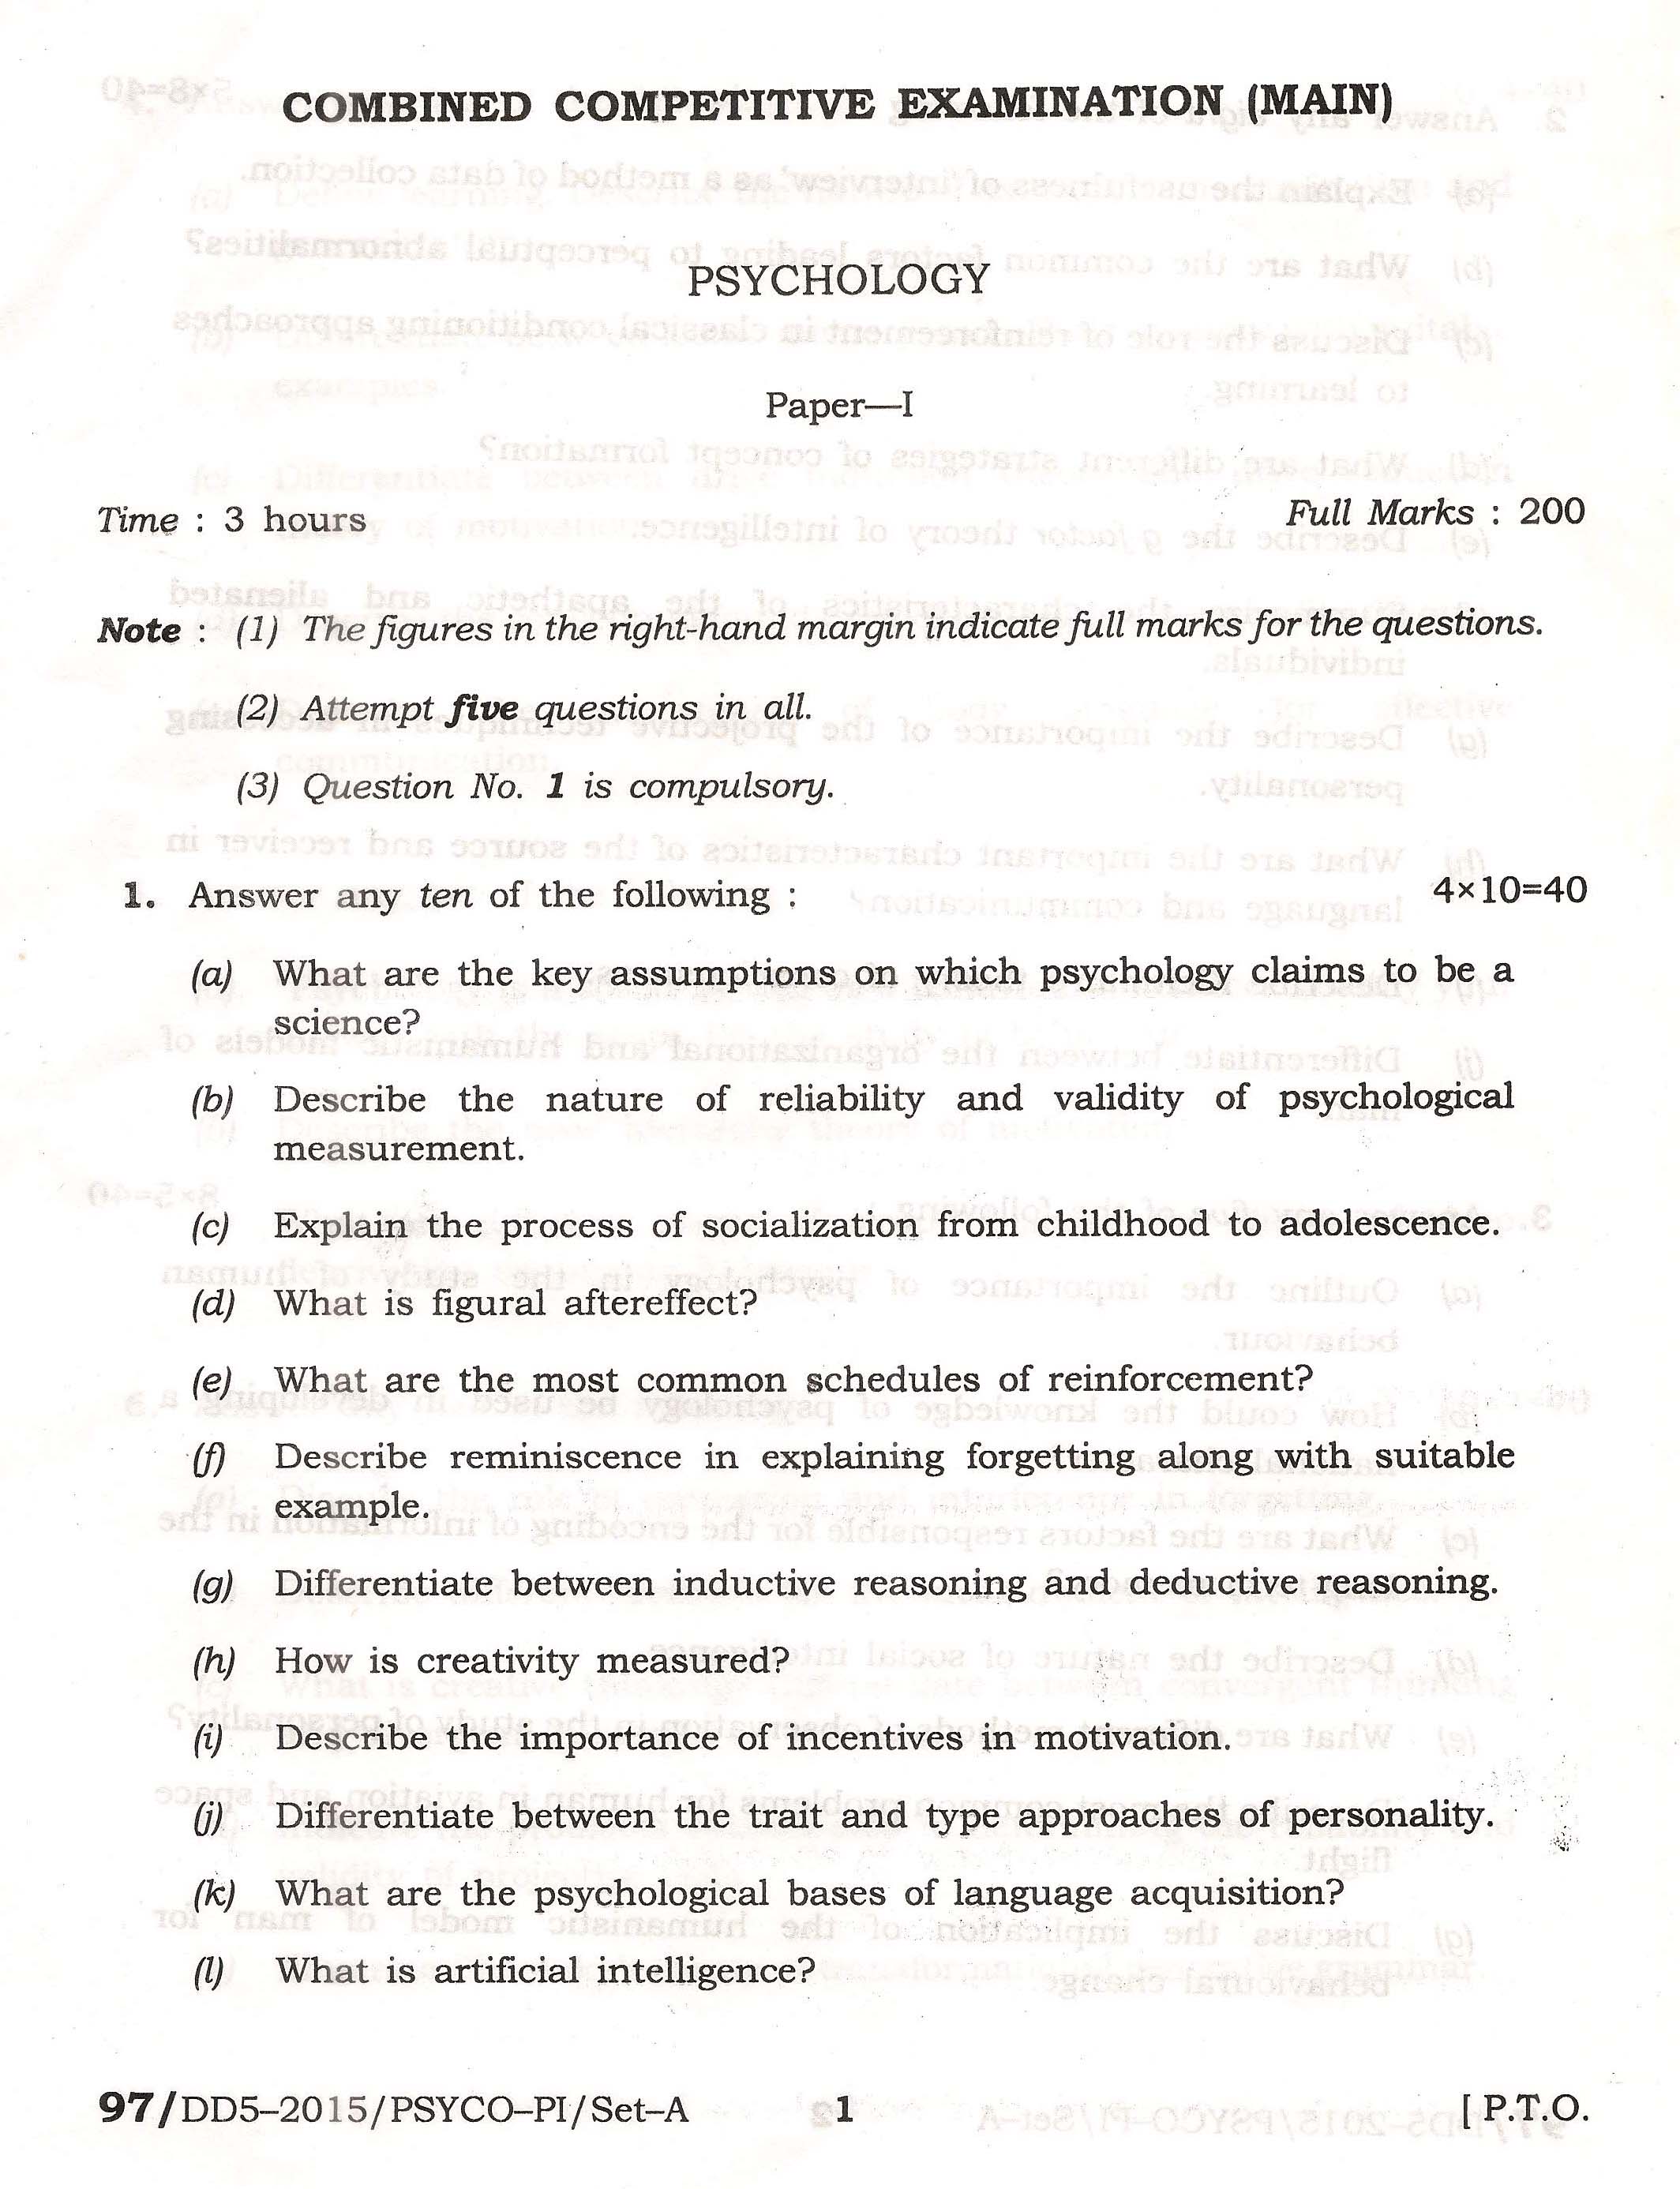 APPSC Combined Competitive Main Exam 2015 Psychology Paper I 1